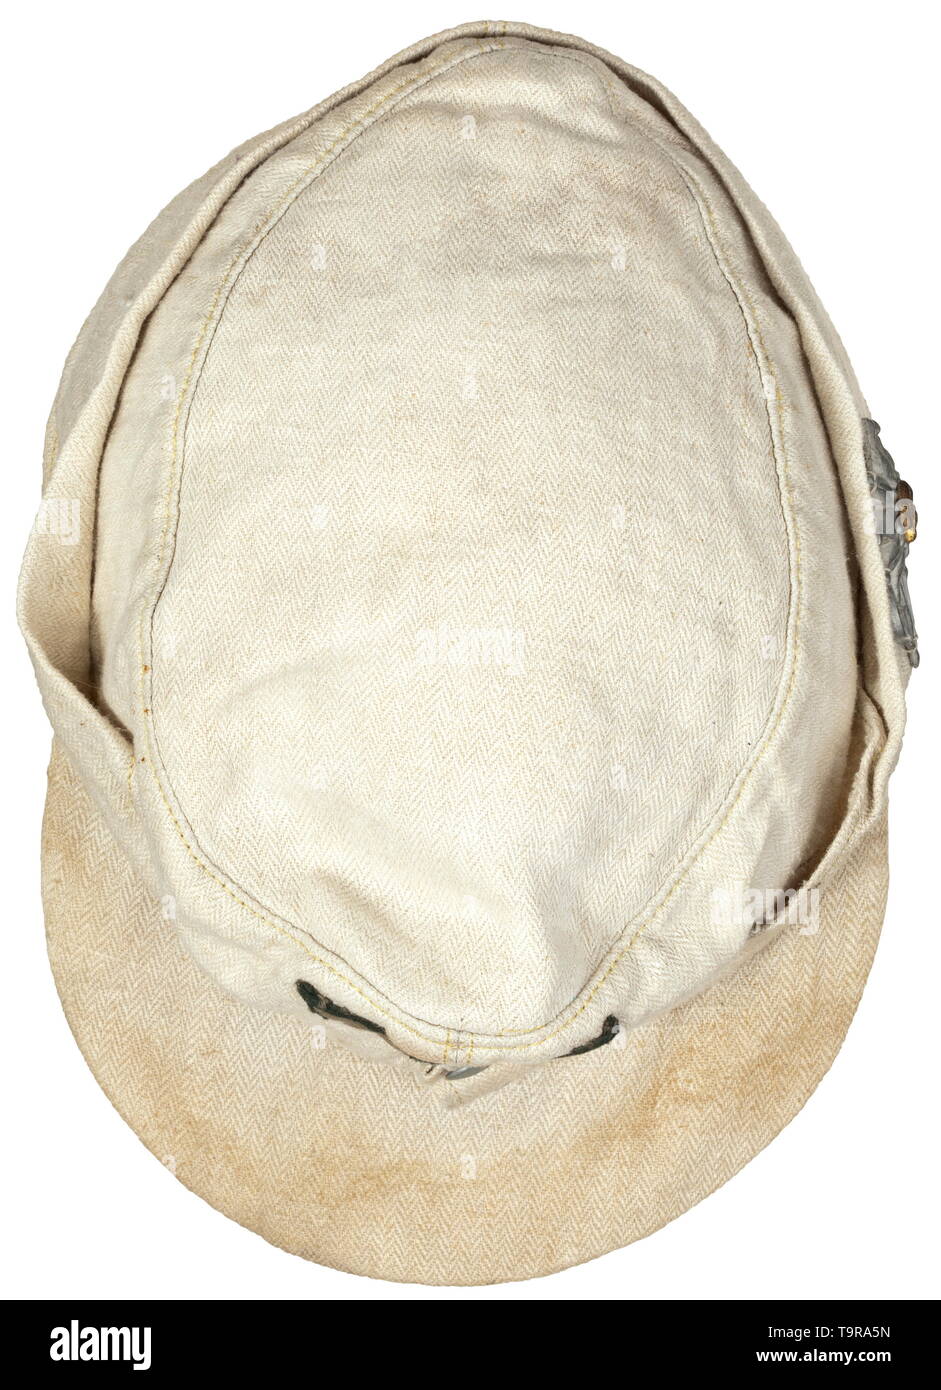 A summer field cap for Jäger (riflemen)/NCOs of the mountain troops Weißer Drillich mit silbernen Metallknöpfen, Futter aus Grundtuch. T-förmig vernähter Adler und Kokarde, jeweils auf dunkelgrünem Grund, Metalledelweiß. historic, historical, army, armies, armed forces, military, militaria, object, objects, stills, clipping, clippings, cut out, cut-out, cut-outs, 20th century, Editorial-Use-Only Stock Photo